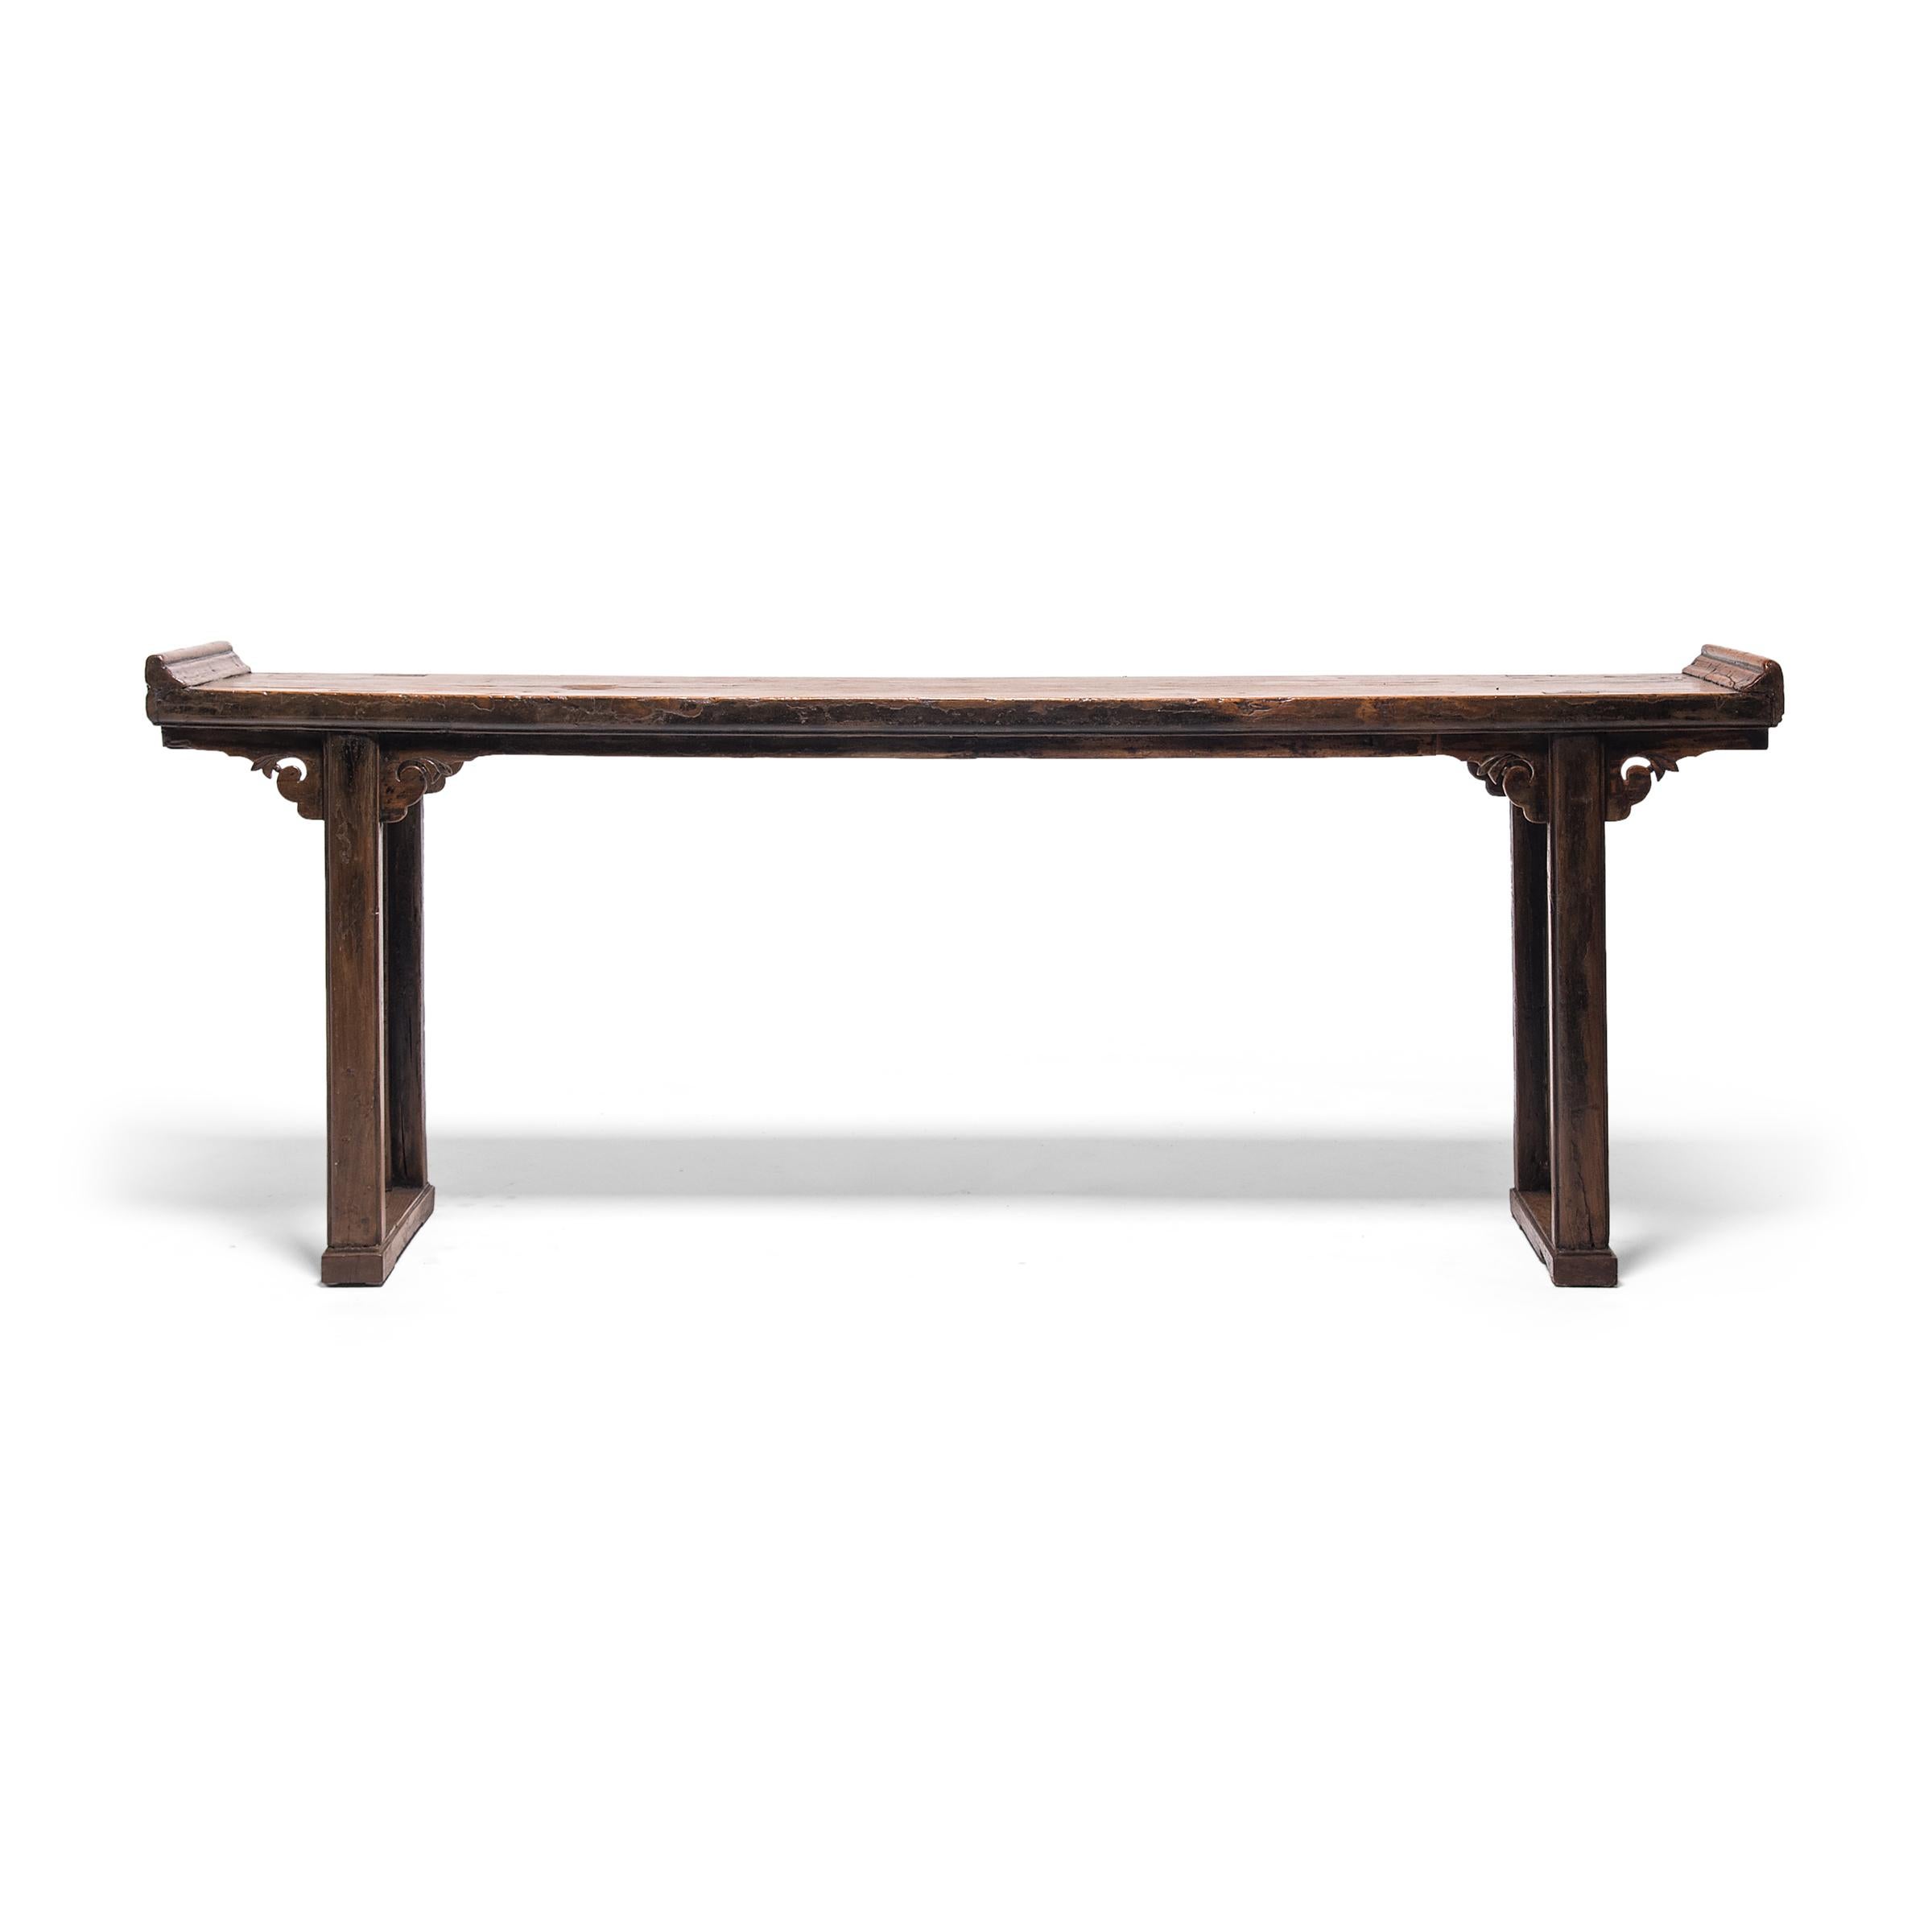 With everted ends and straight square legs, this 19th century altar table embodies Classic Qing dynasty design. Originally used as a domestic altar for ancestor worship, the long console has an expansive tabletop surface and is minimally decorated